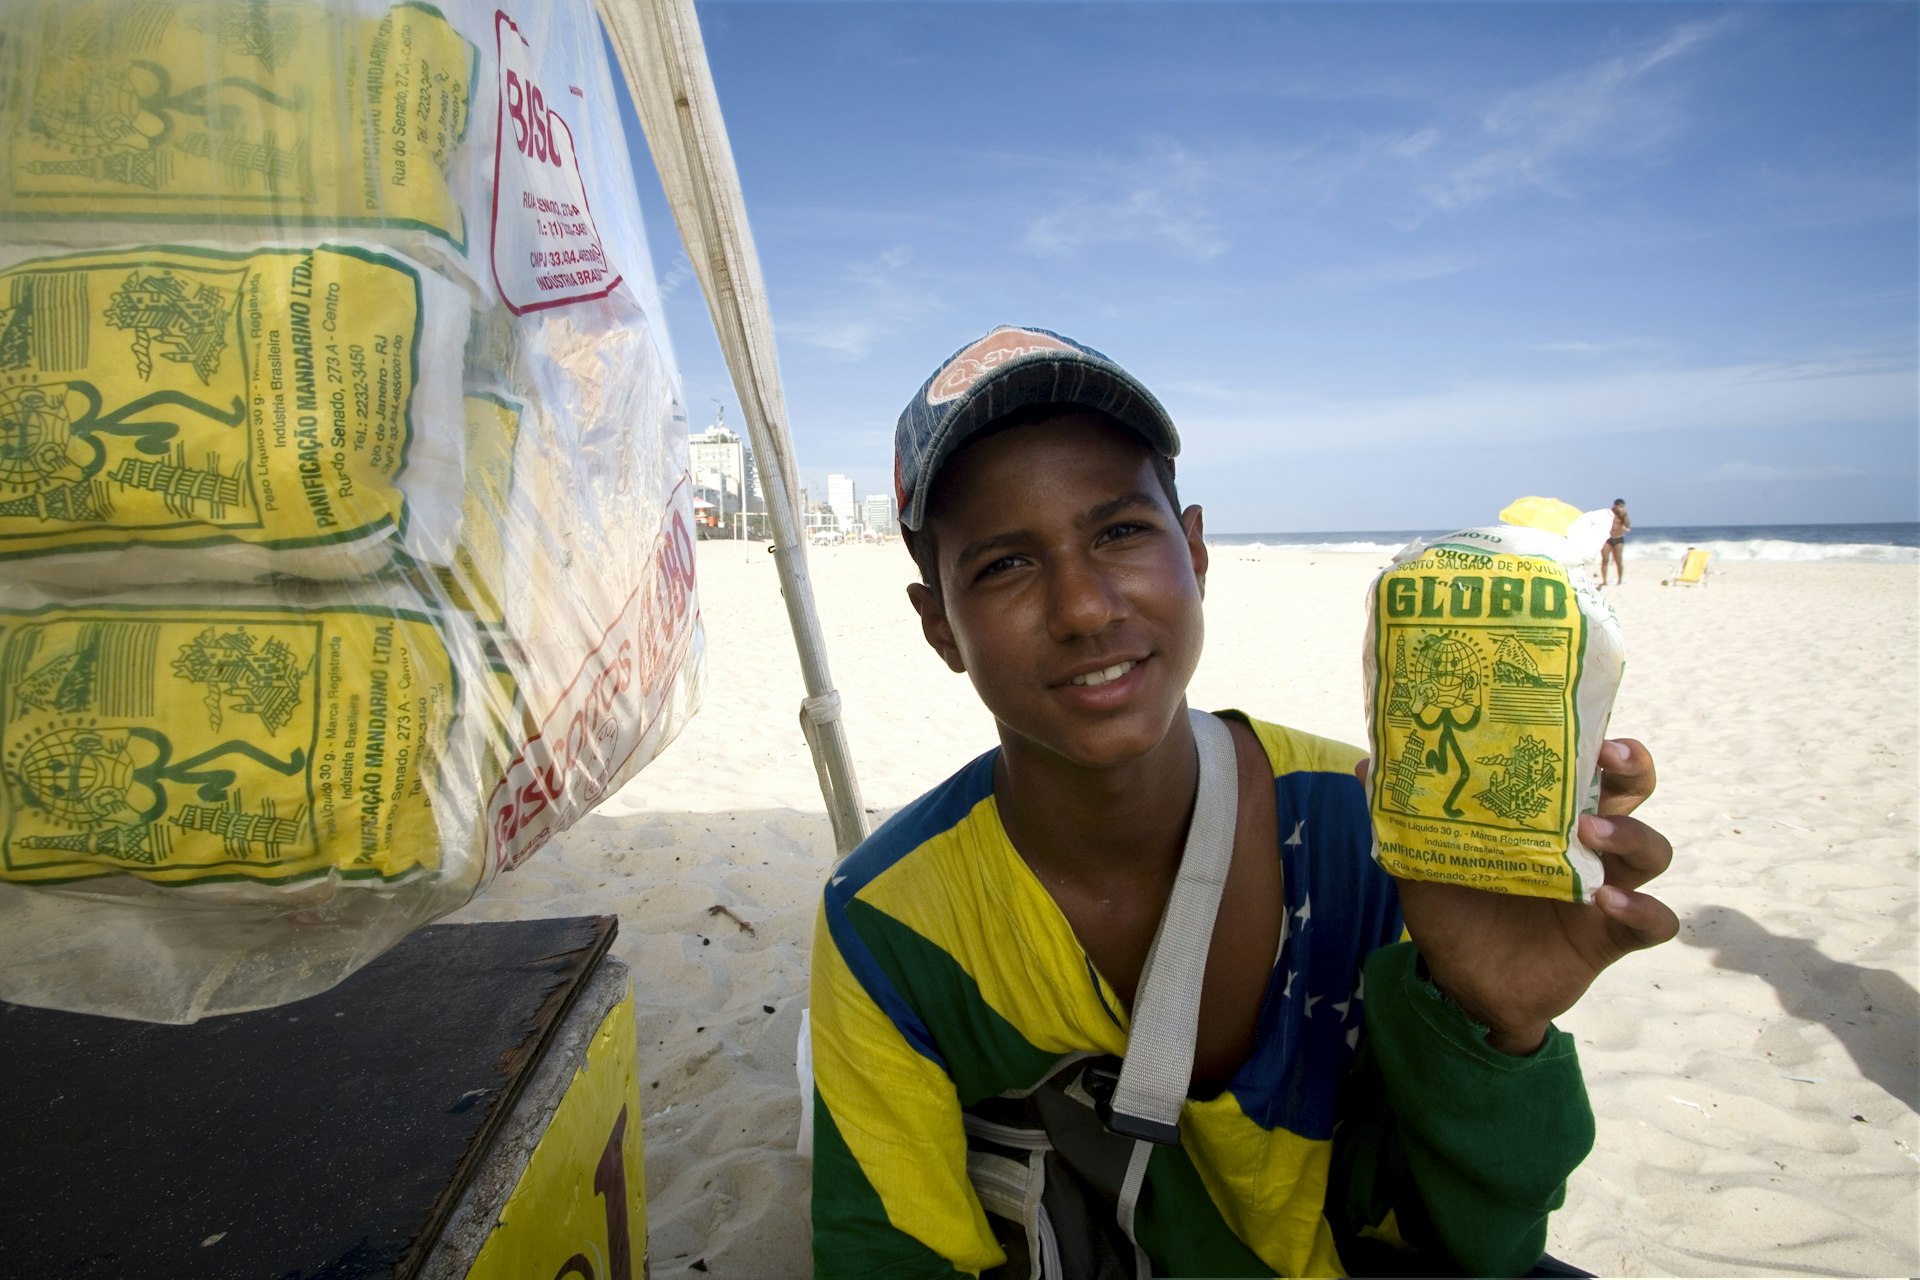 Portrait of young vendor selling Globo biscuits on the beach. 